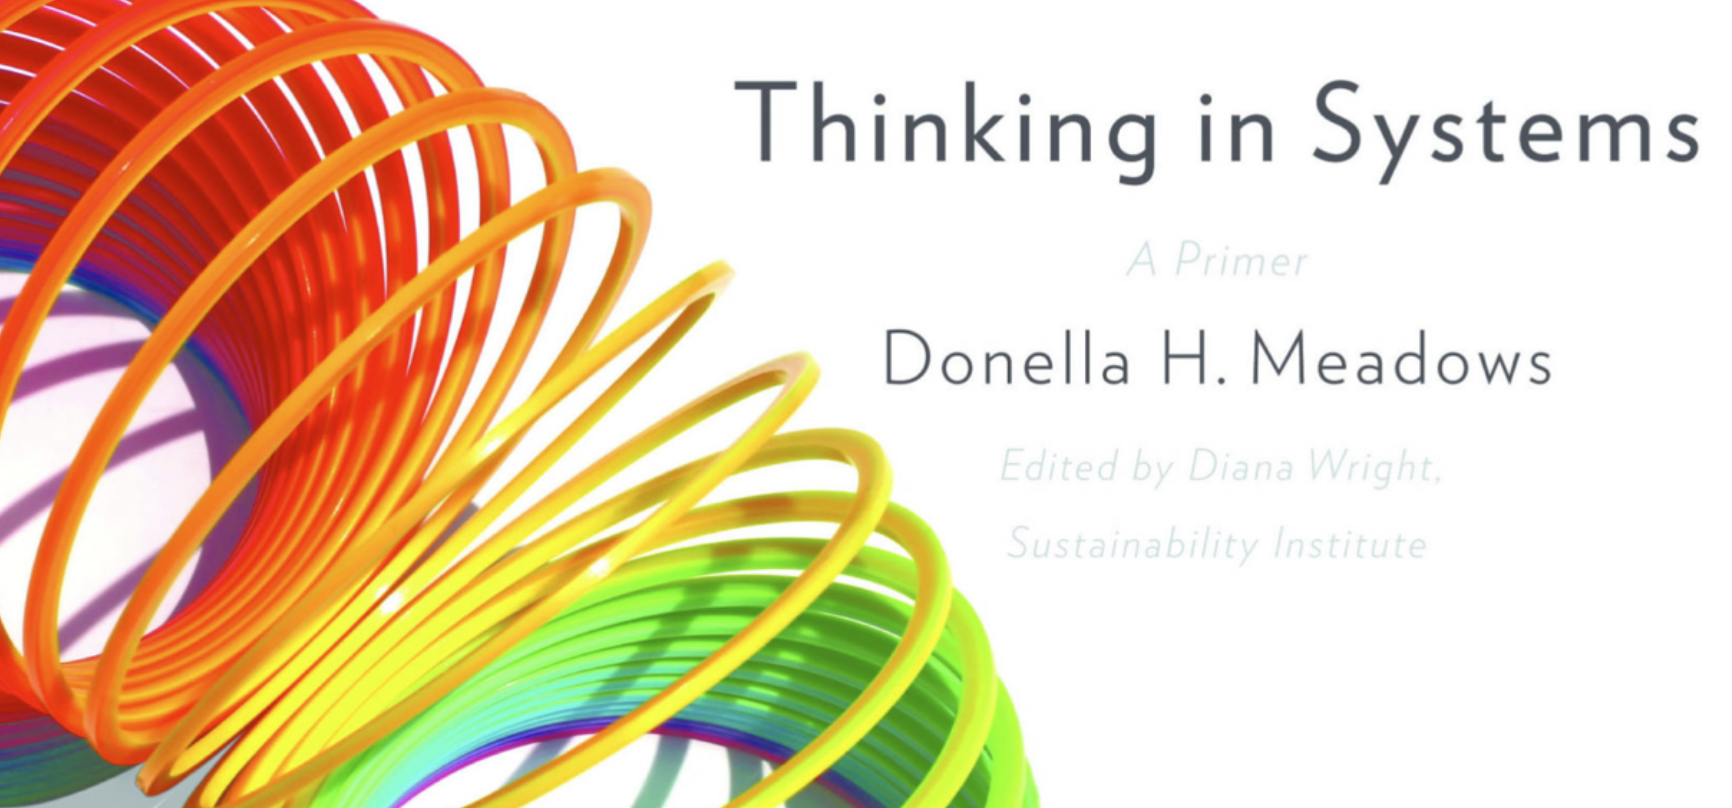 Review of Thinking in Systems: A Primer